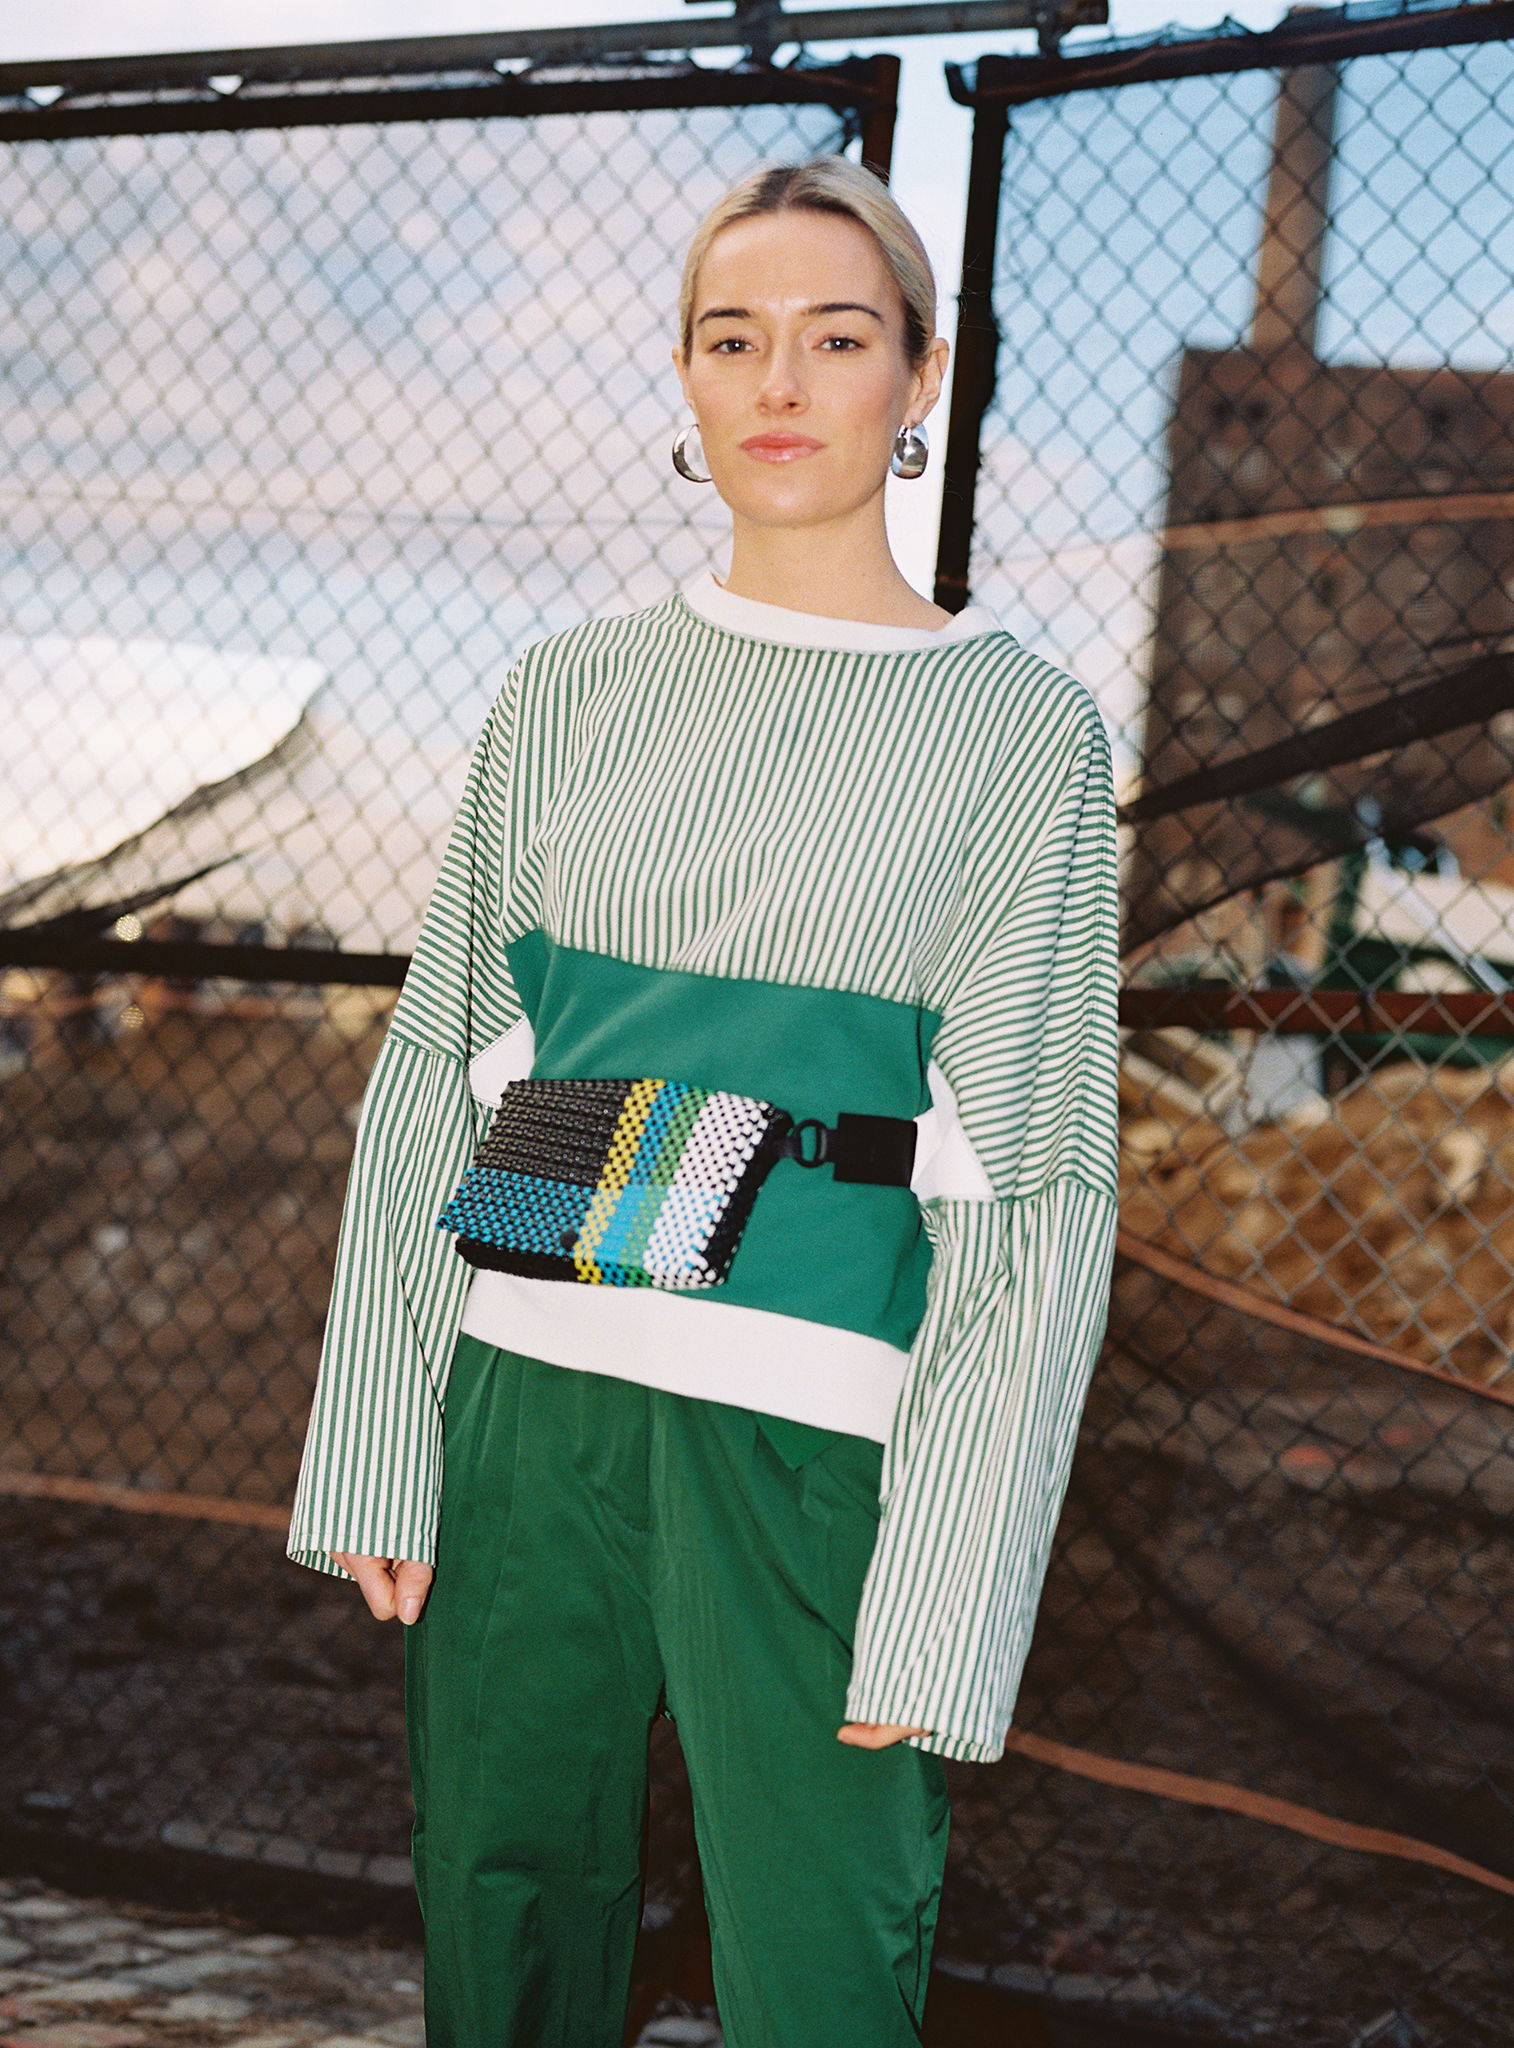 truss's woven fanny packs empower artisans in mexico - i-D